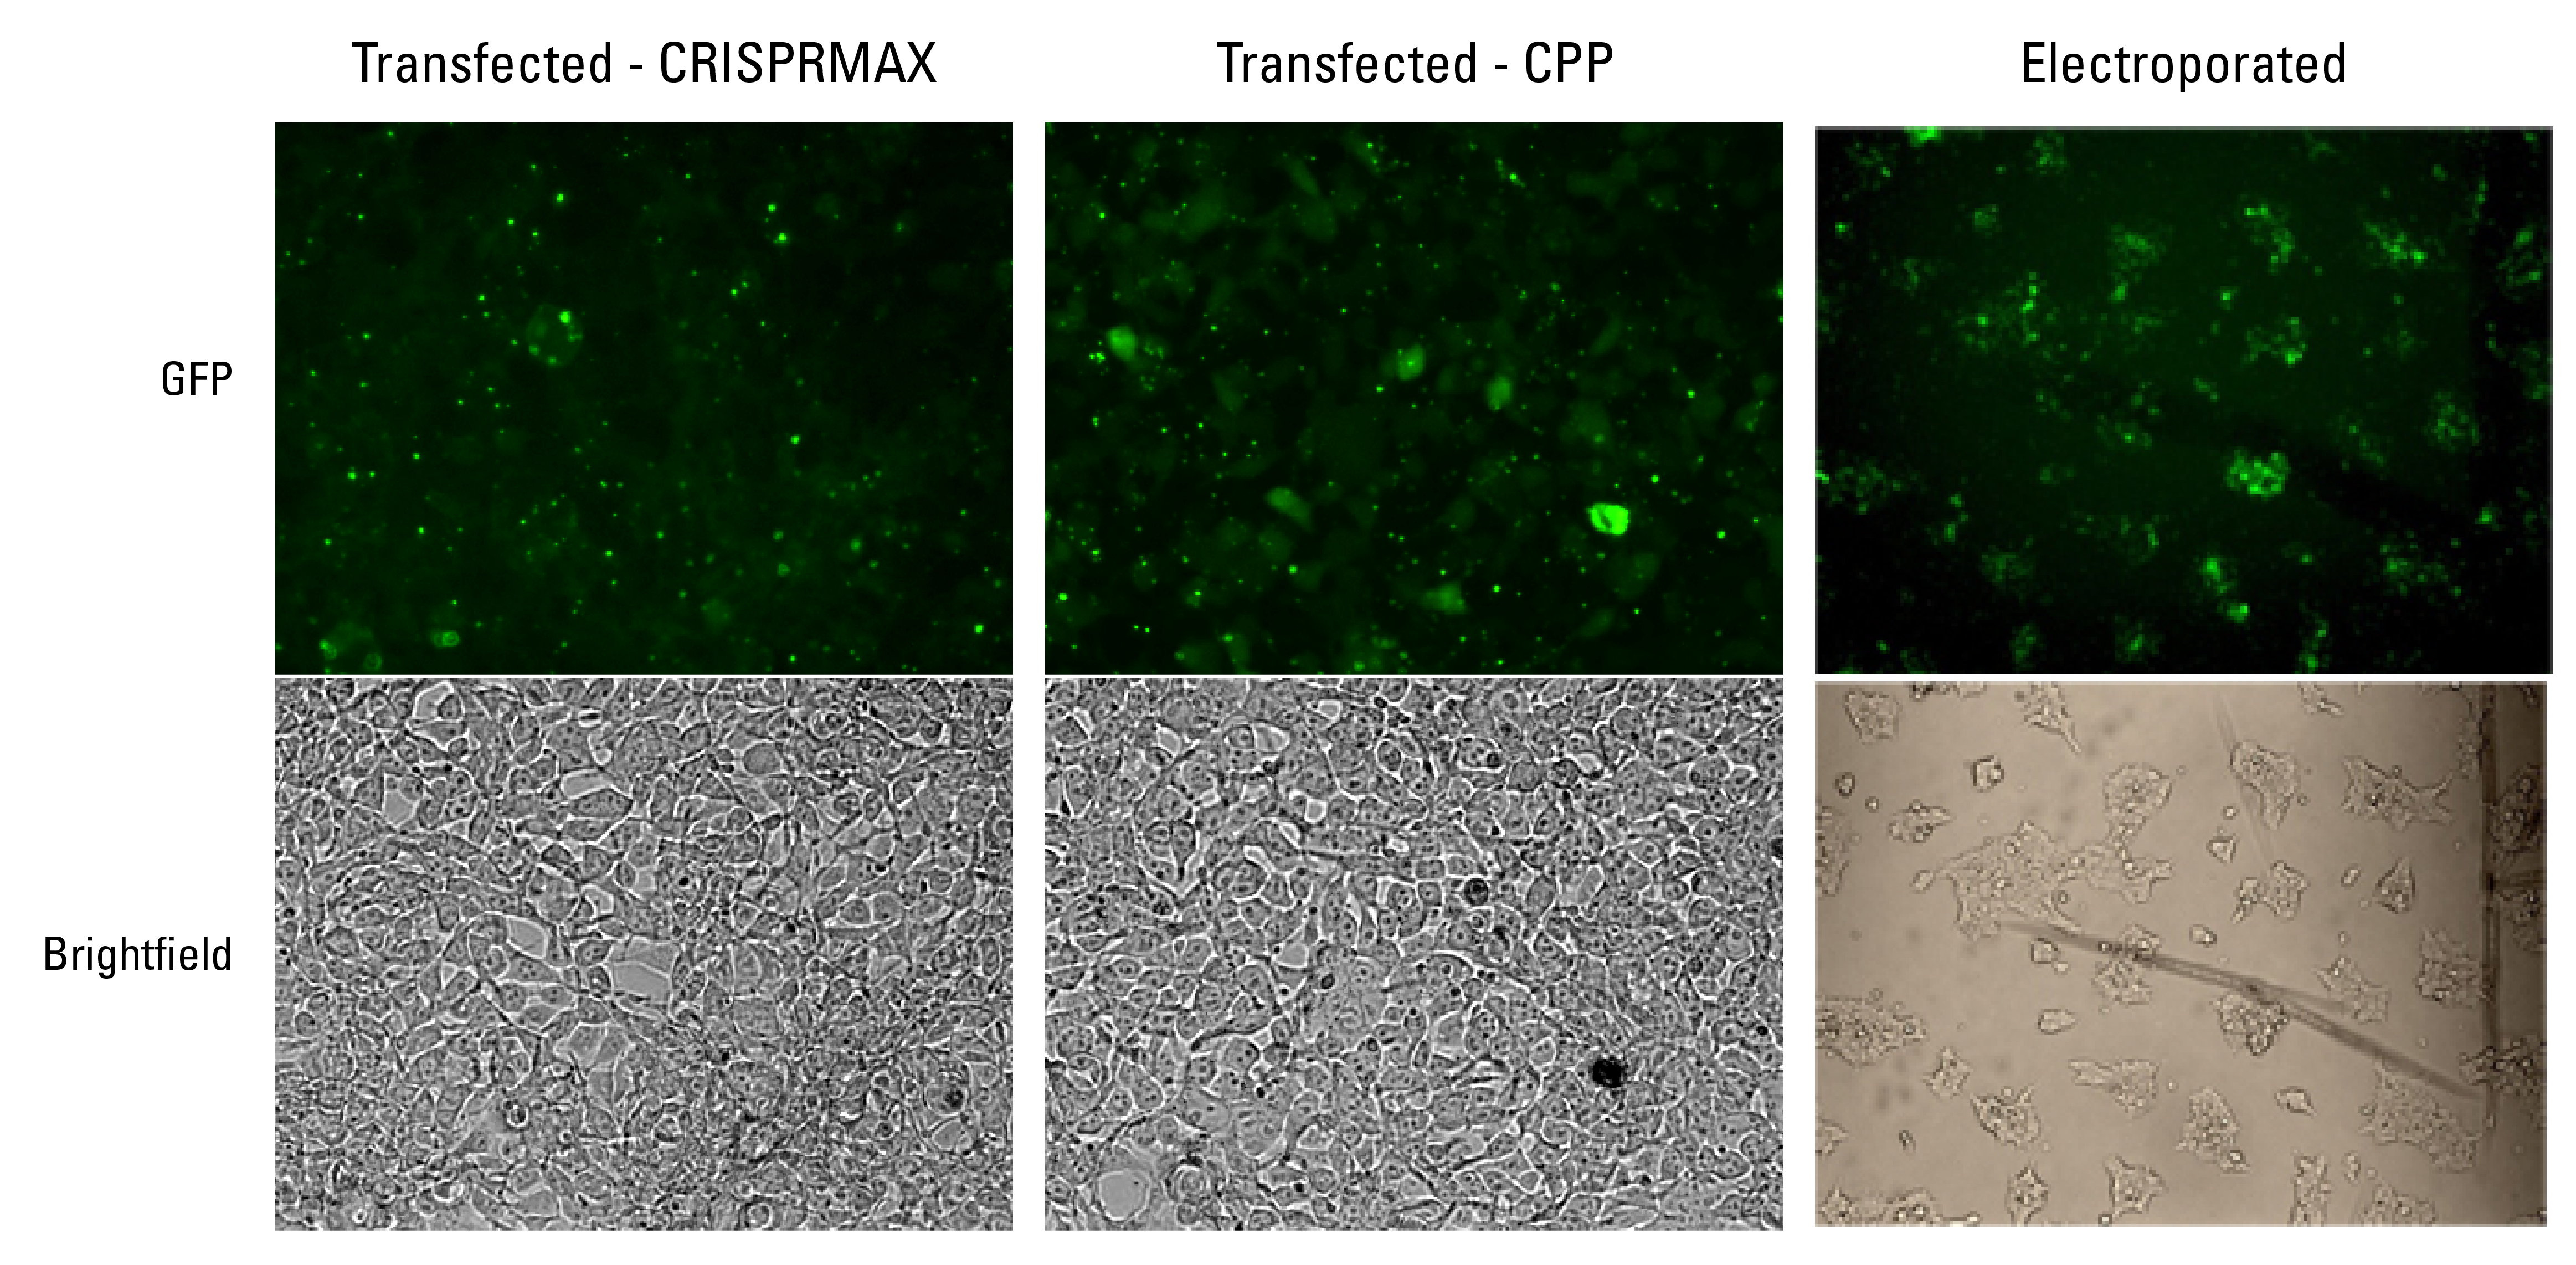 NLS-Cas9-EGFP can be transfected and electroporated into cells